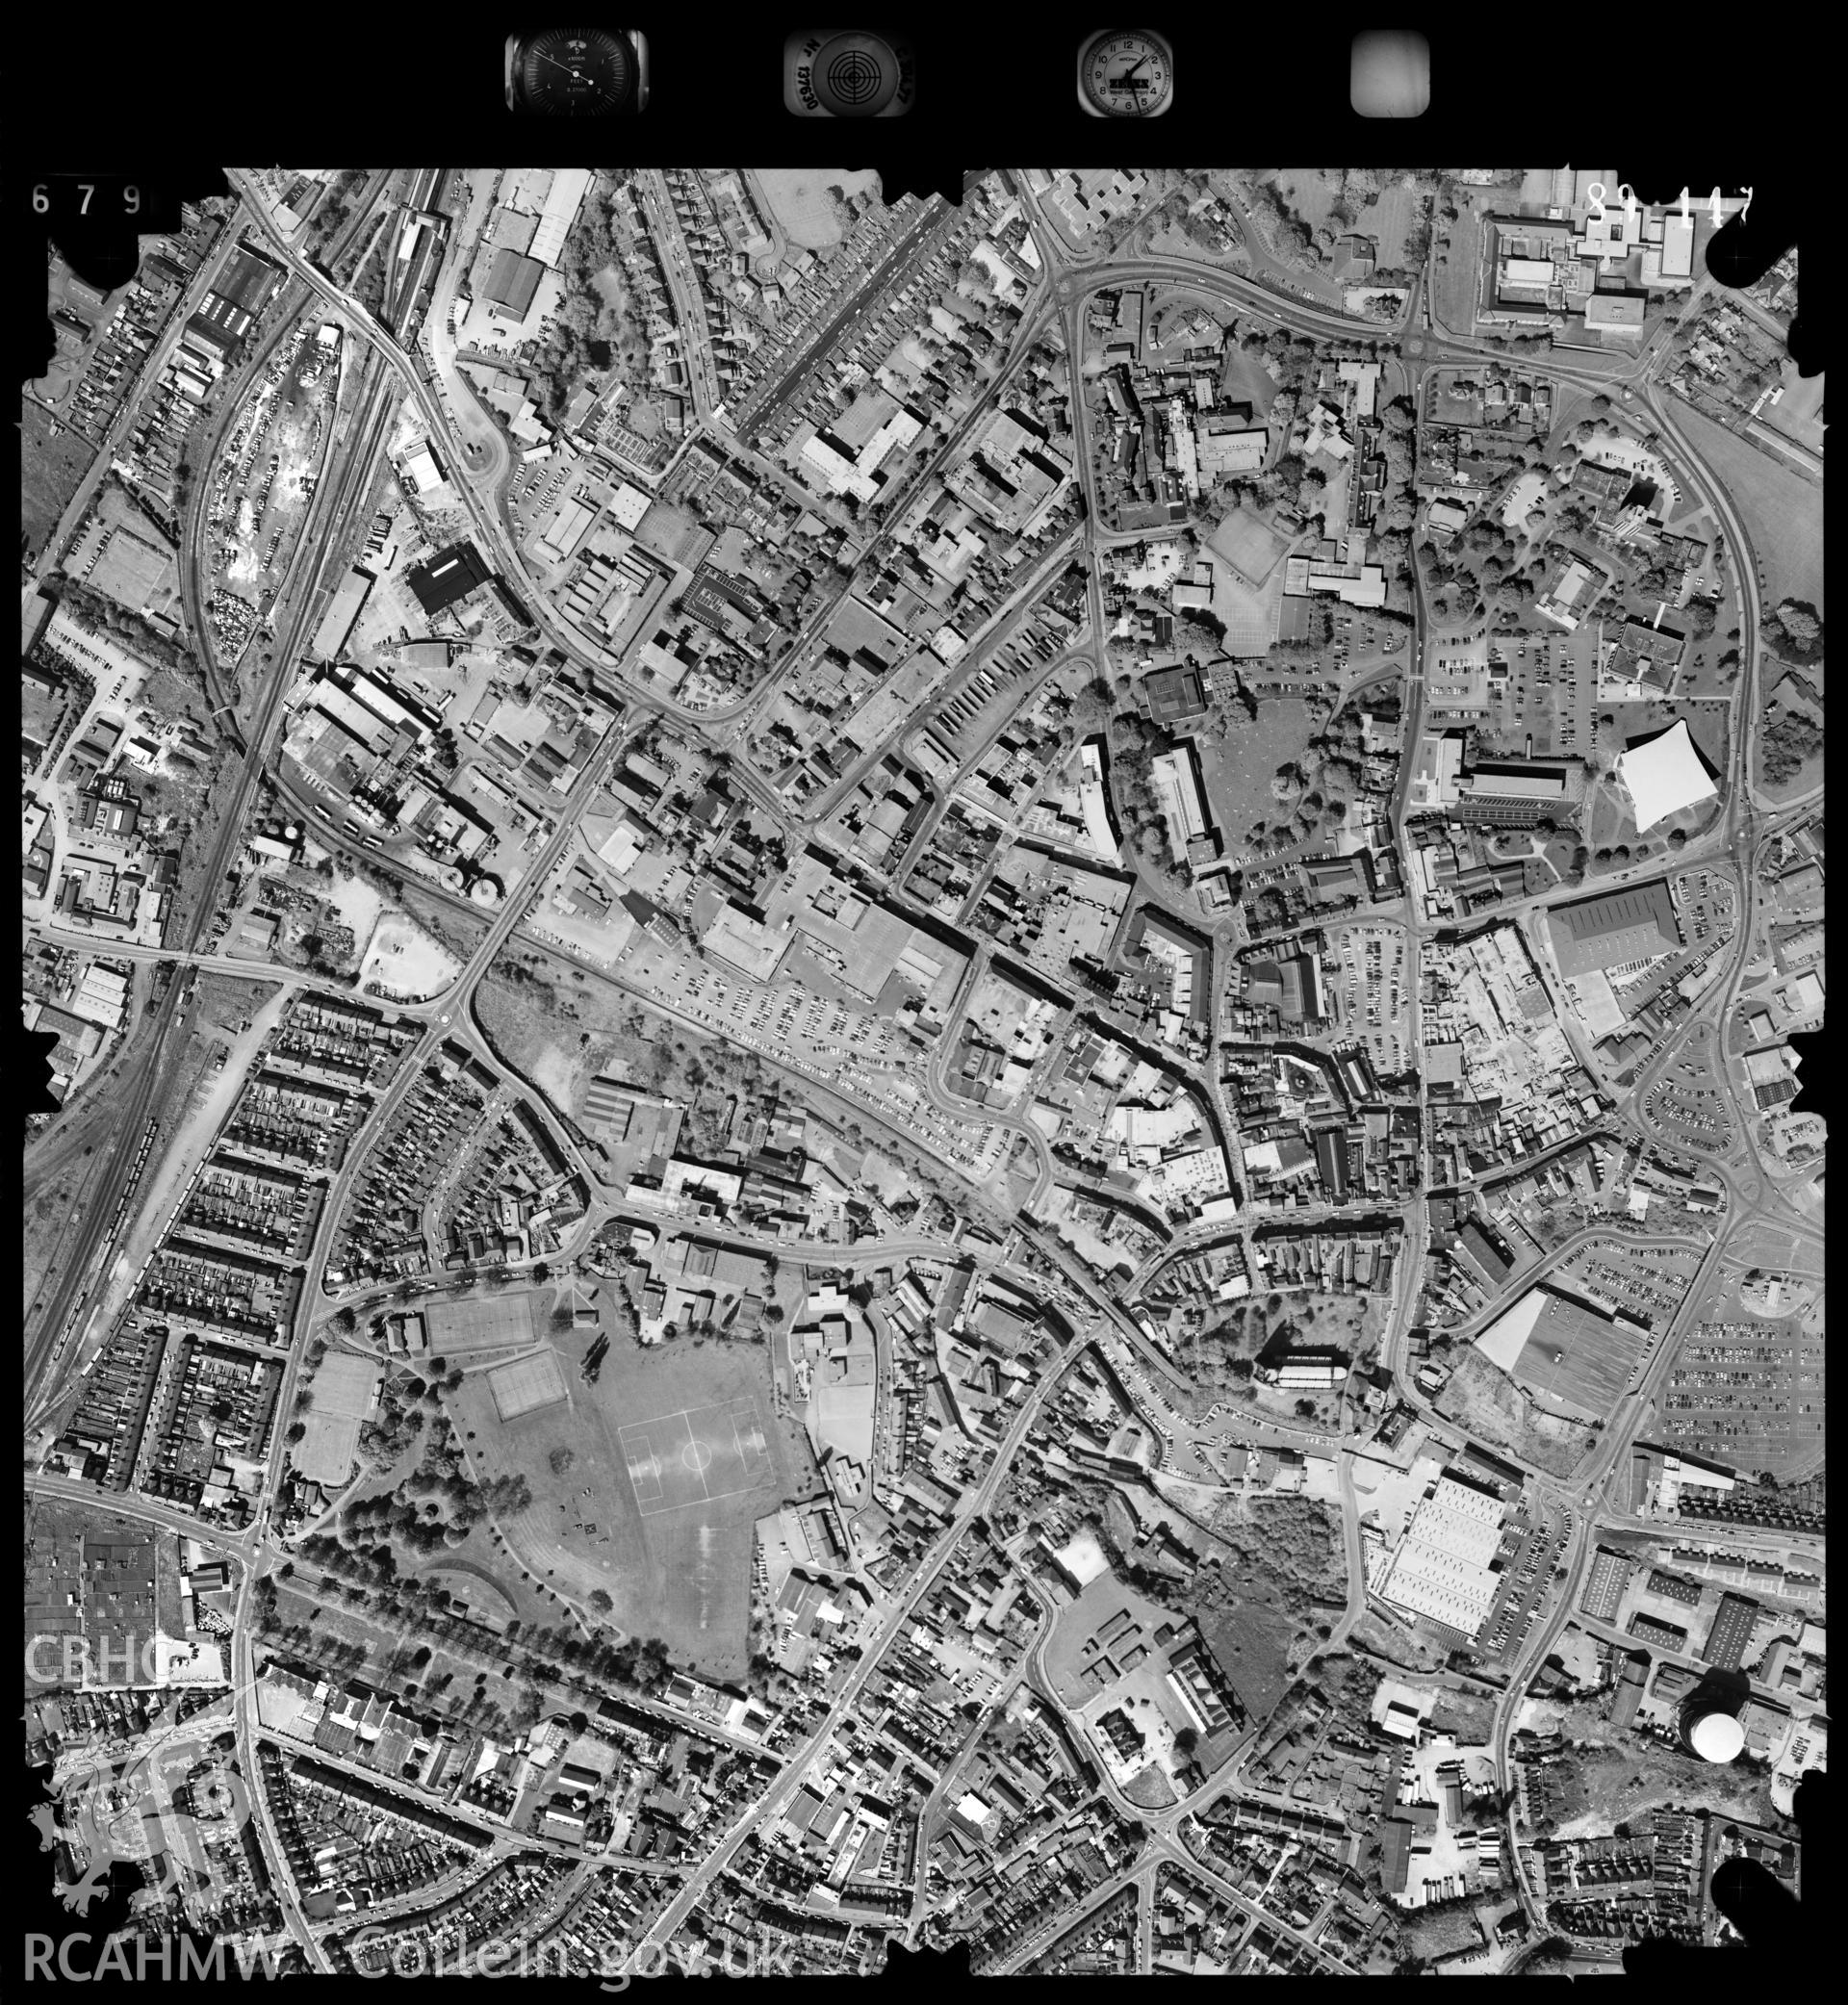 Digitized copy of an aerial photograph showing the Wrexham area,  taken by Ordnance Survey, 1989.